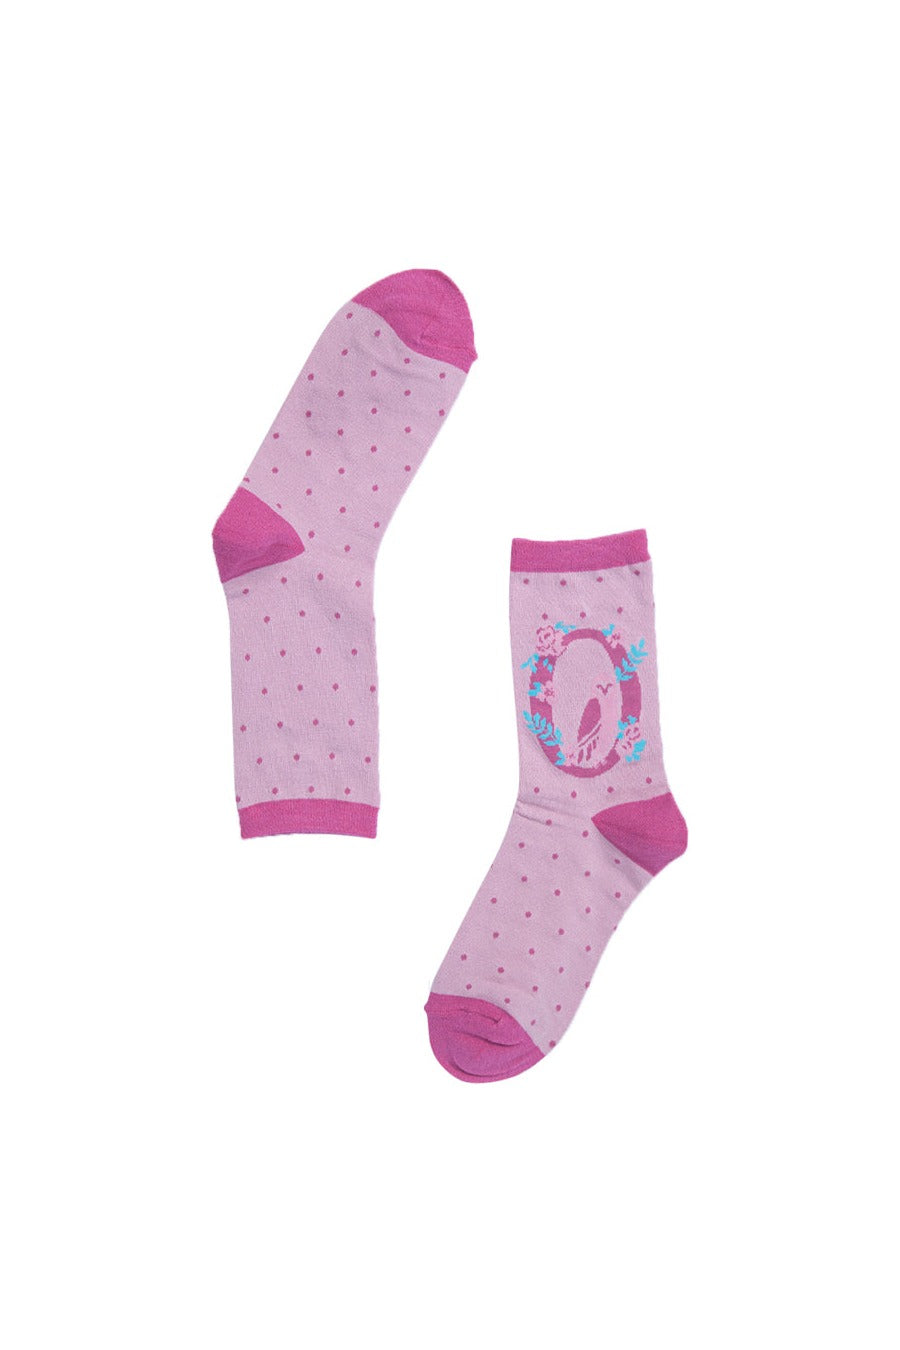 pink bamboo socks with the initial O